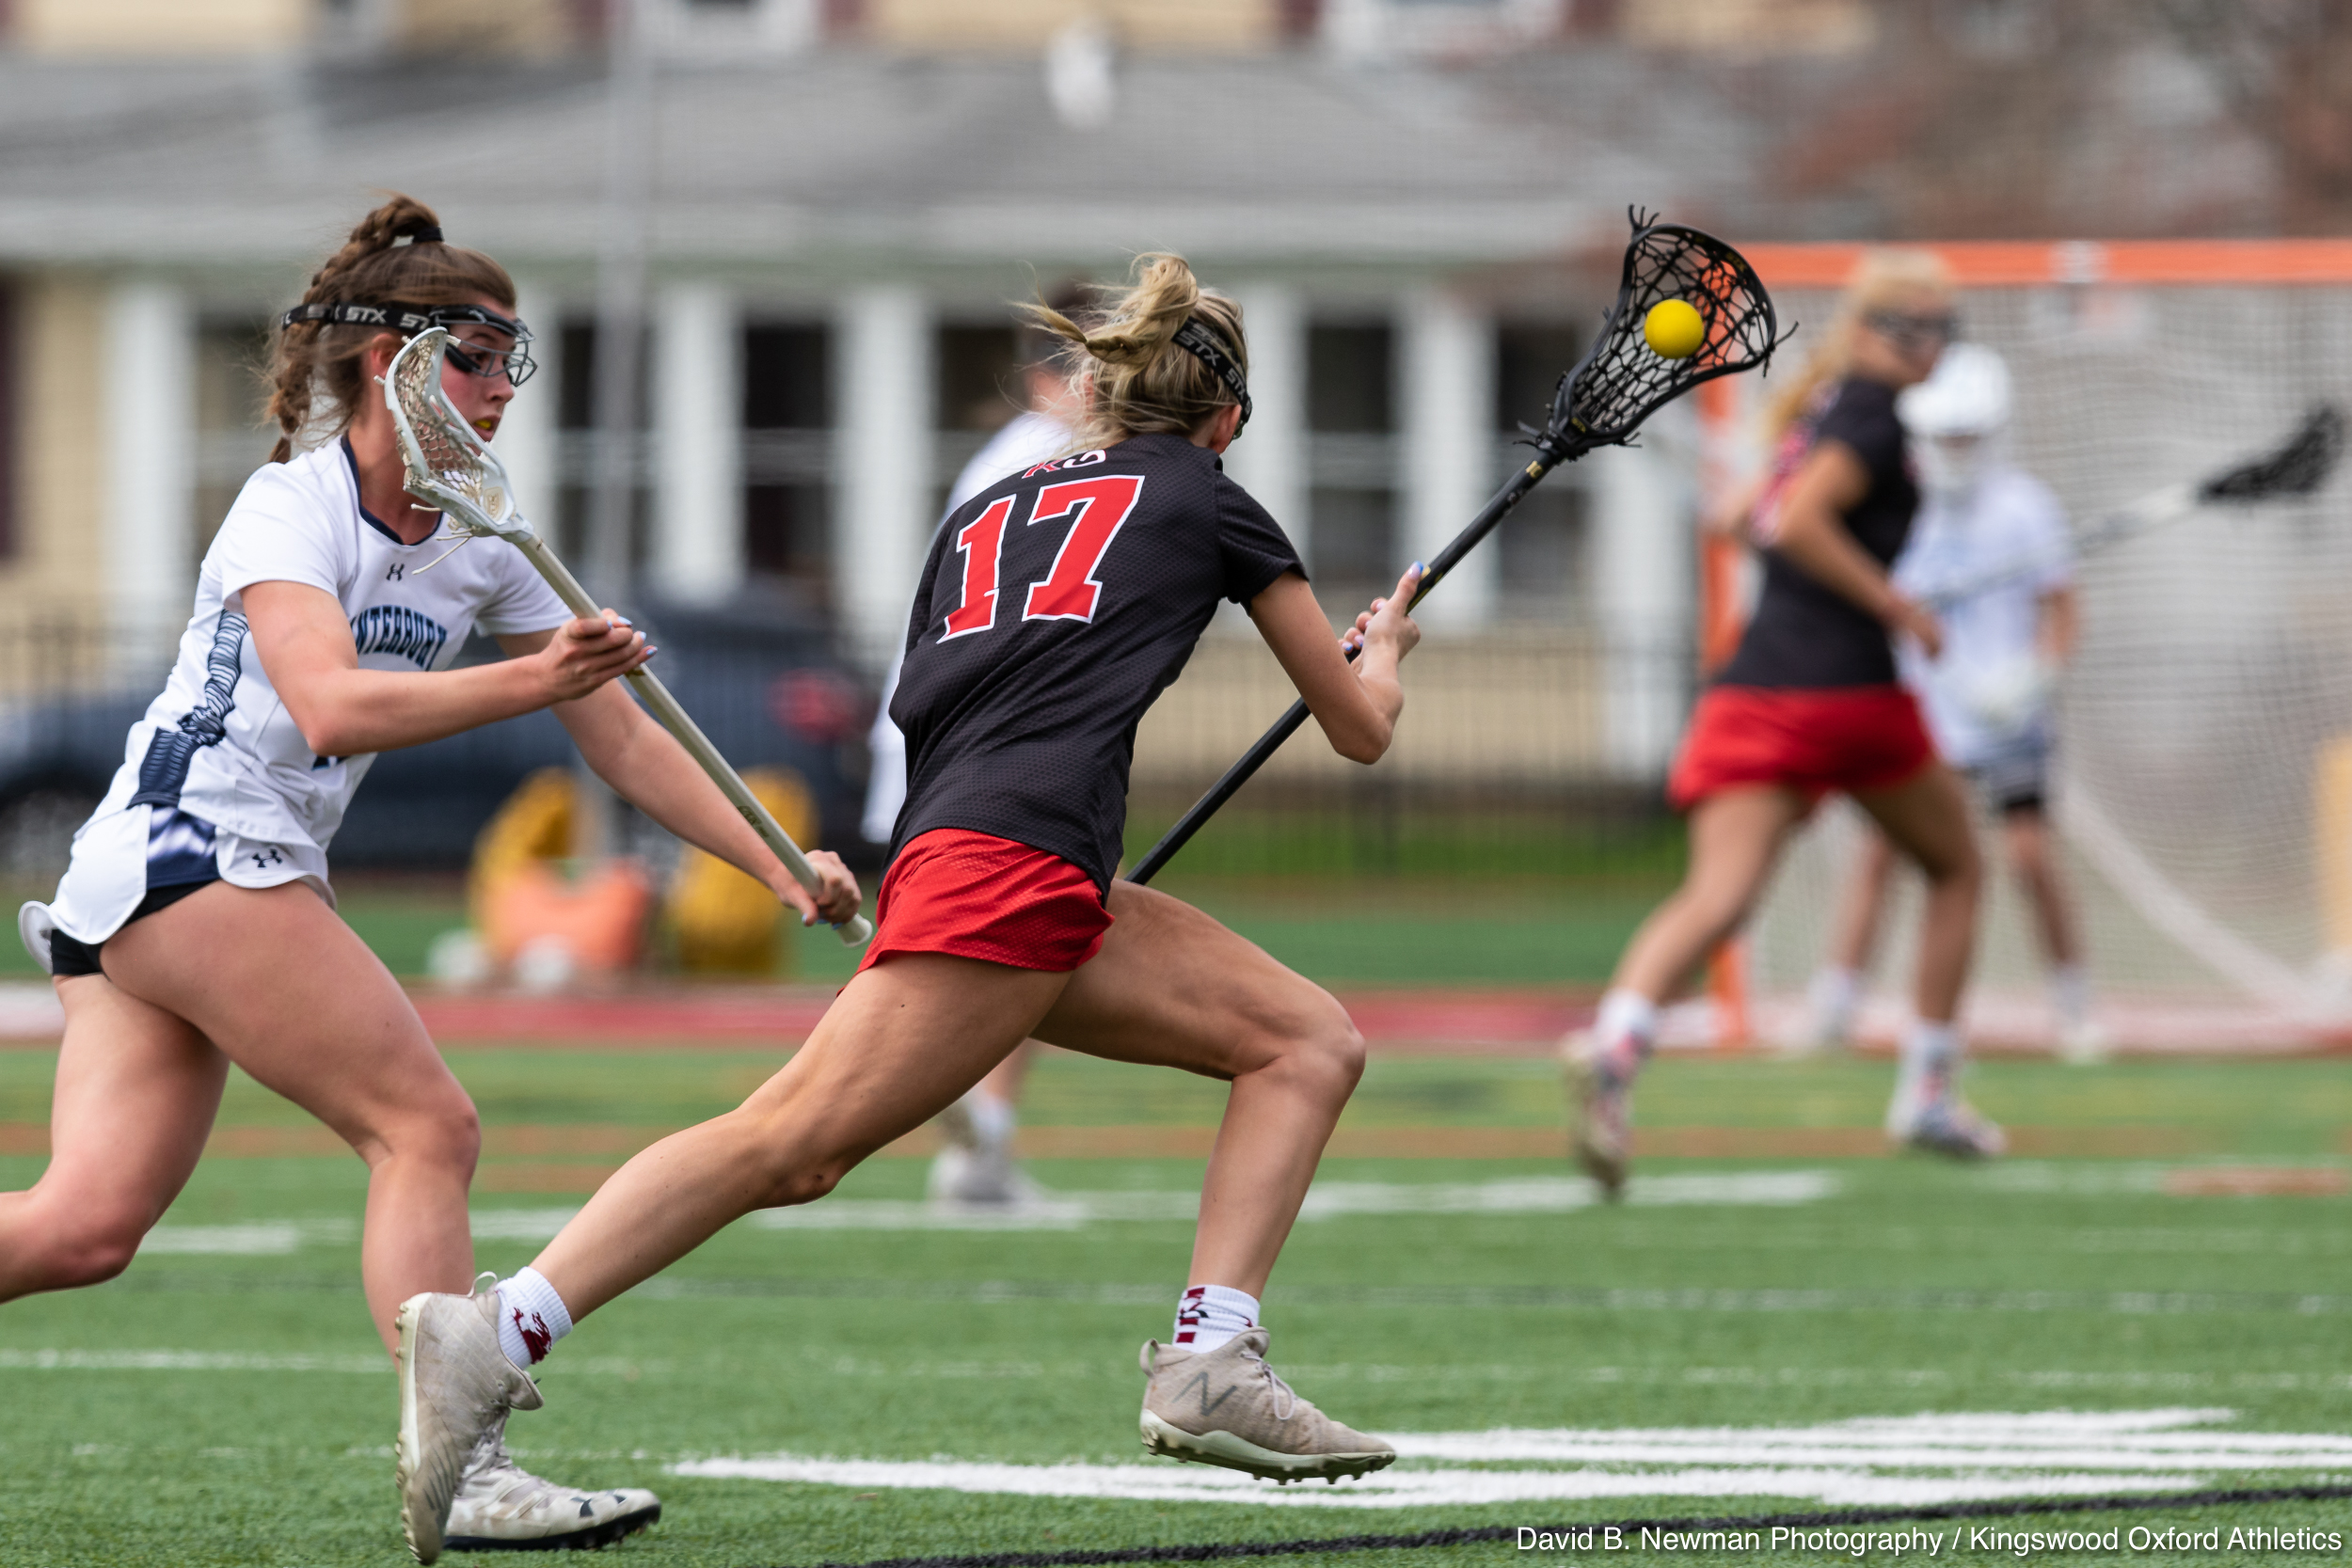 Girls play competitive sports and lacrosse at Kingswood Oxford in West Hartford